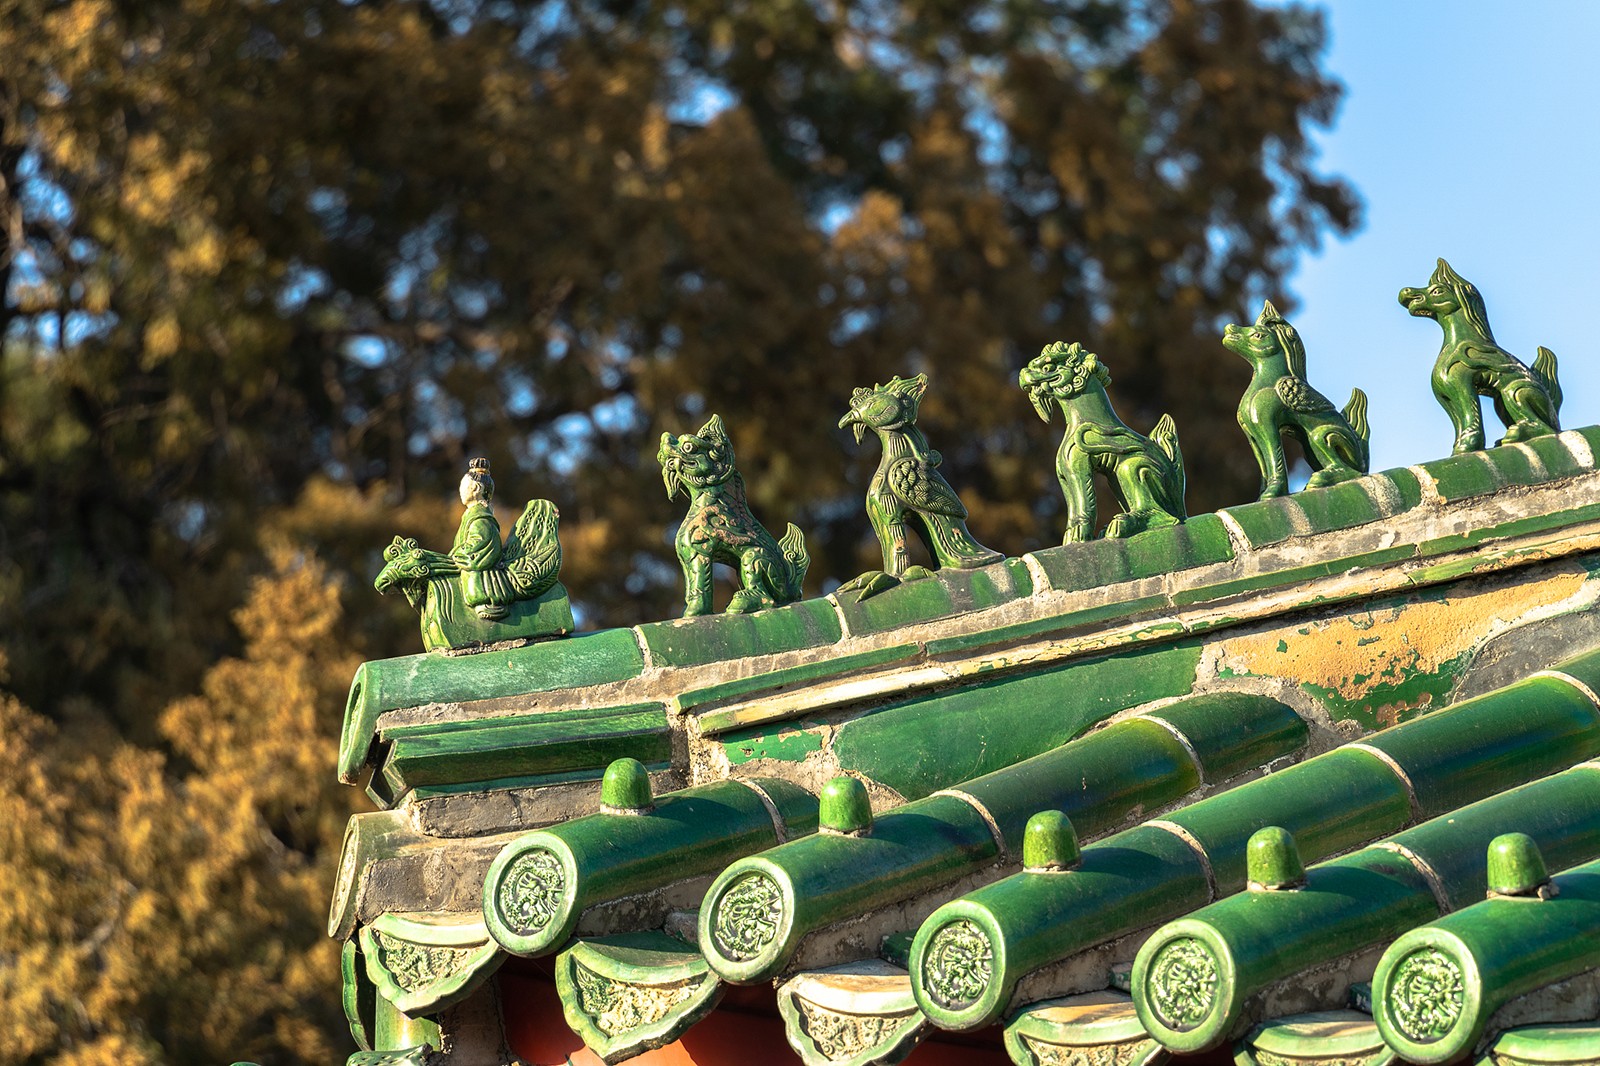 Green glazed roofs are found on certain structures within the Temple of Heaven complex in Beijing. /CFP